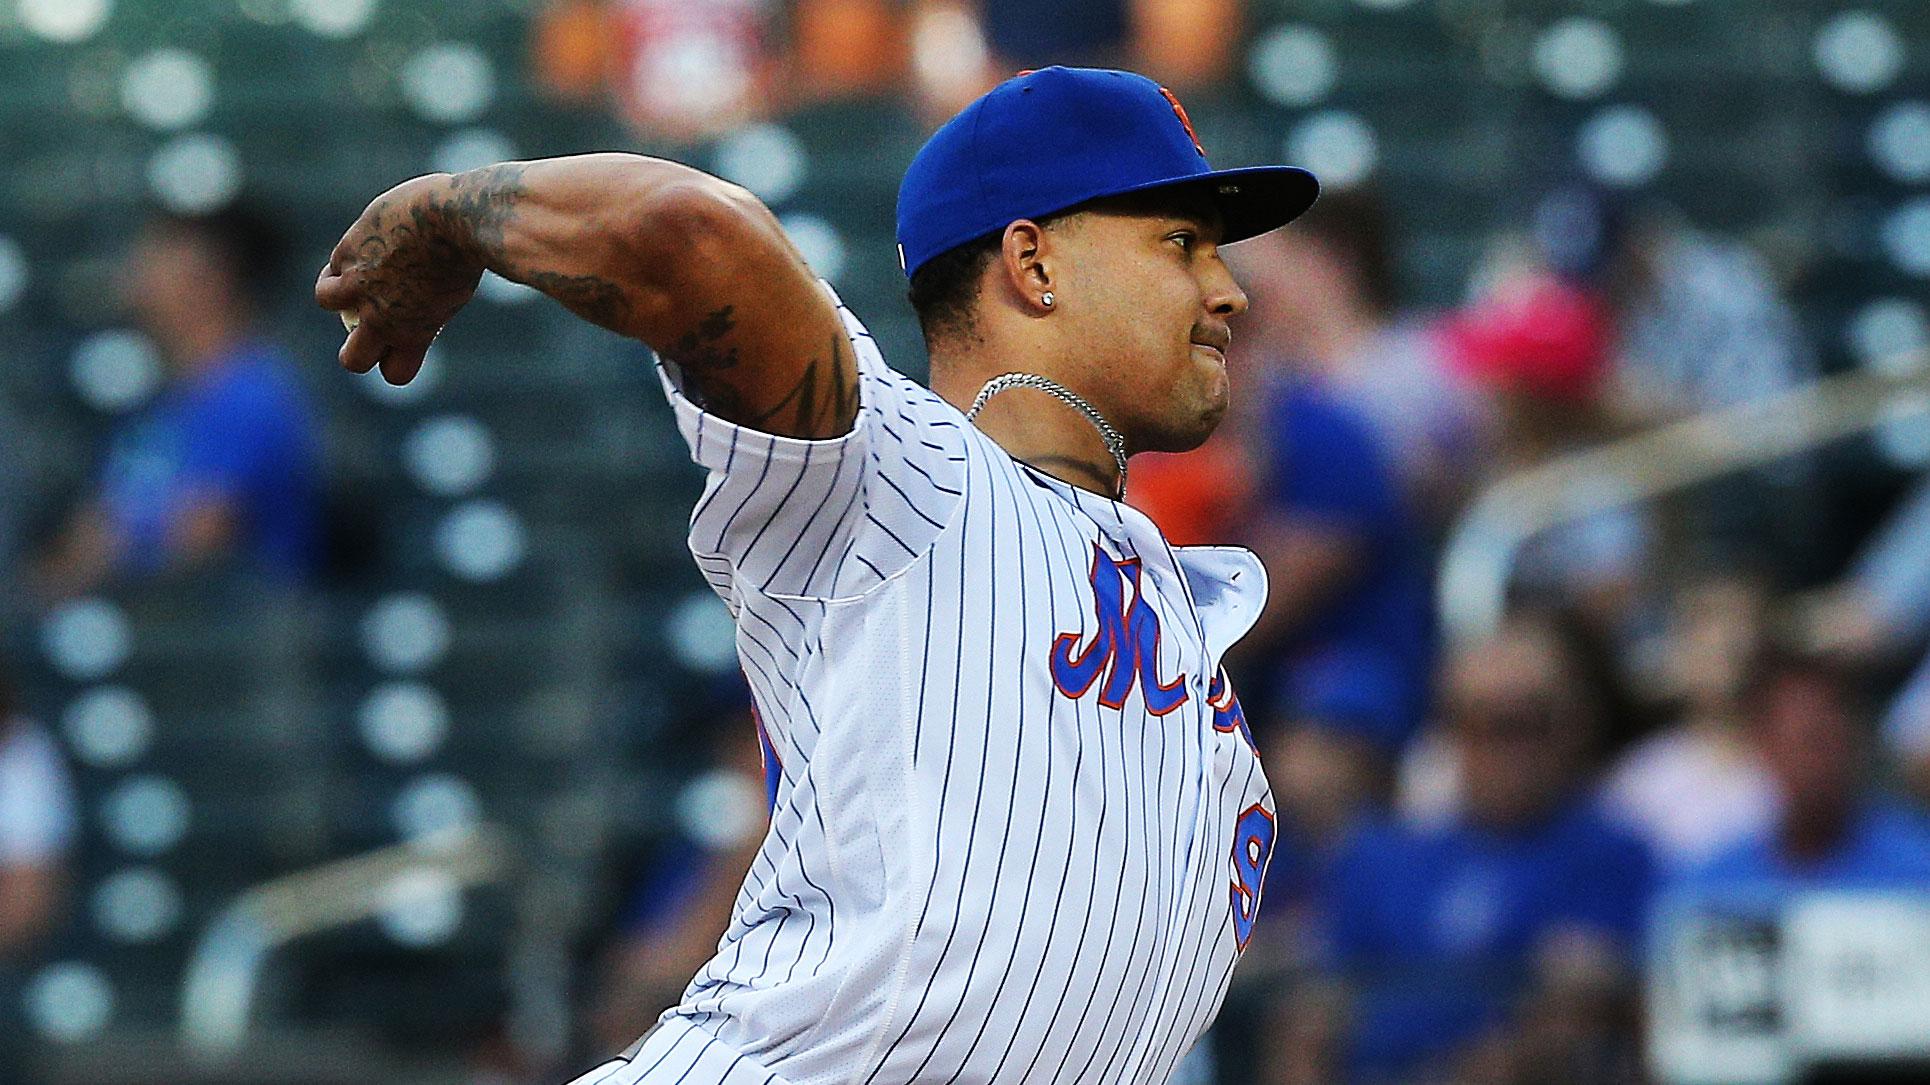 Jun 15, 2021; New York City, New York, USA; New York Mets starting pitcher Taijuan Walker (99) pitches against the Chicago Cubs during the first inning at Citi Field. Mandatory Credit: Andy Marlin-USA TODAY Sports / Andy Marlin-USA TODAY Sports